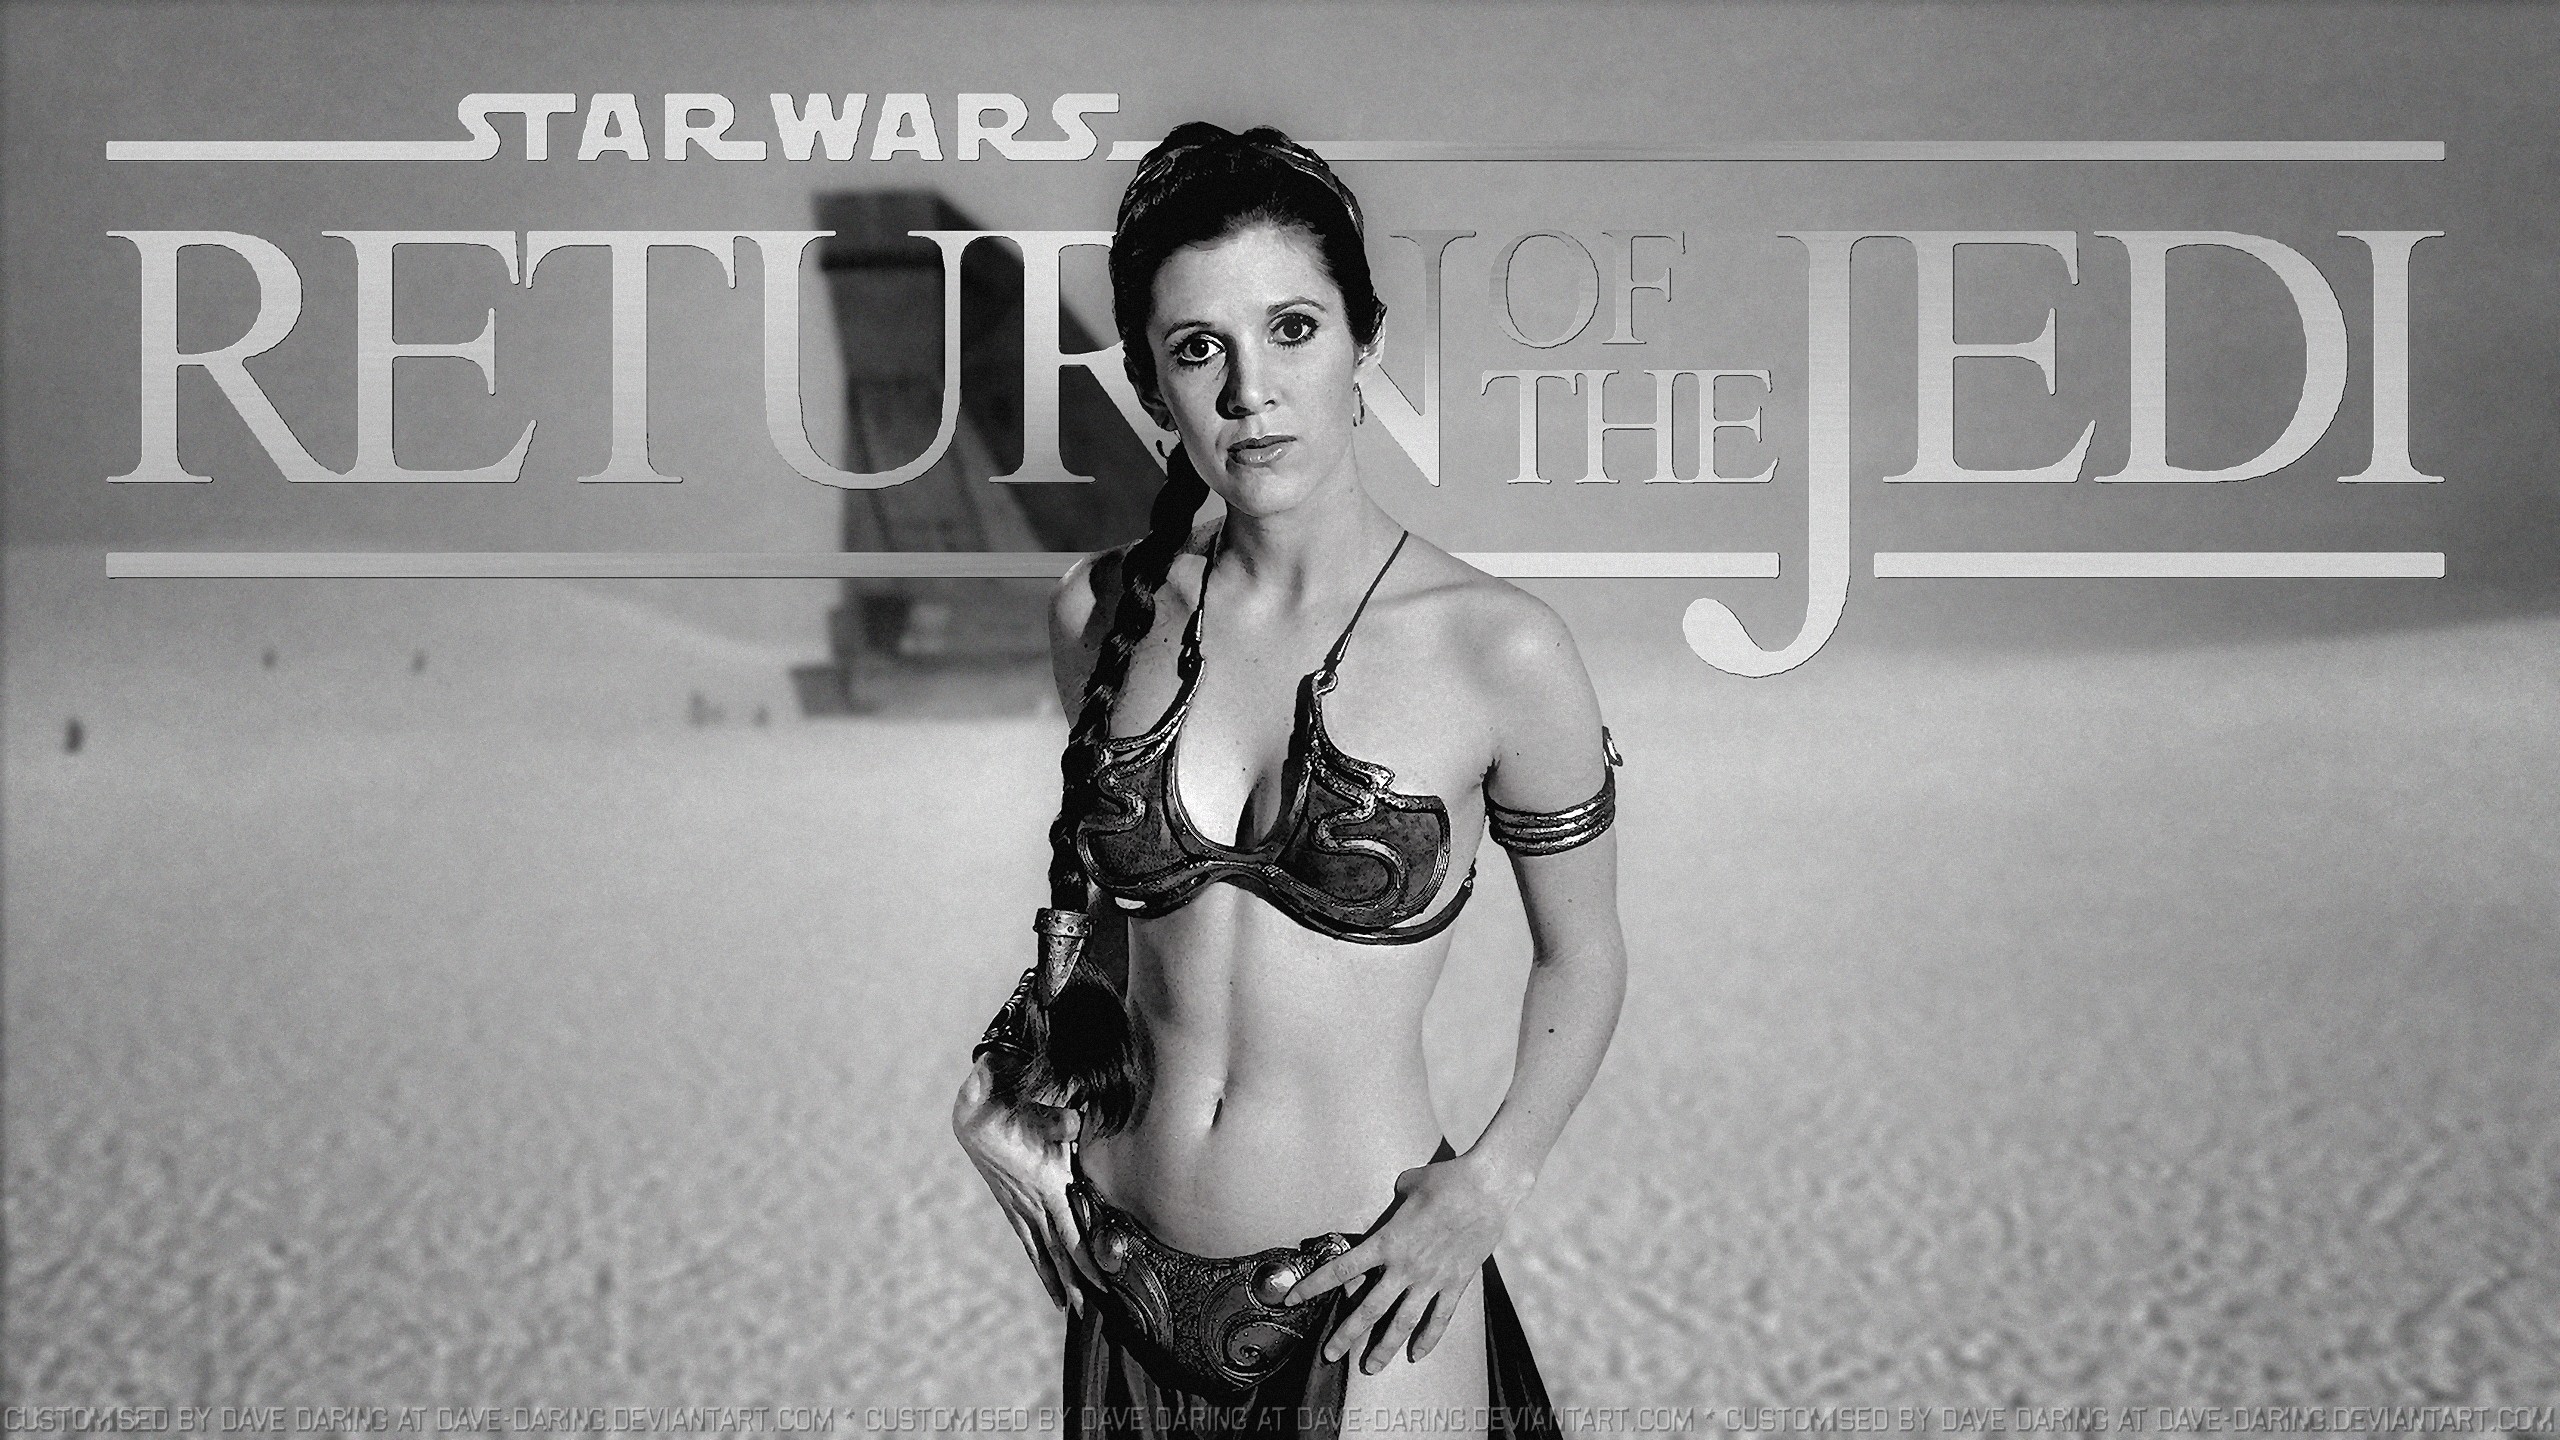 2560x1440 Carrie Fisher as Slave Leia by Dave Daring